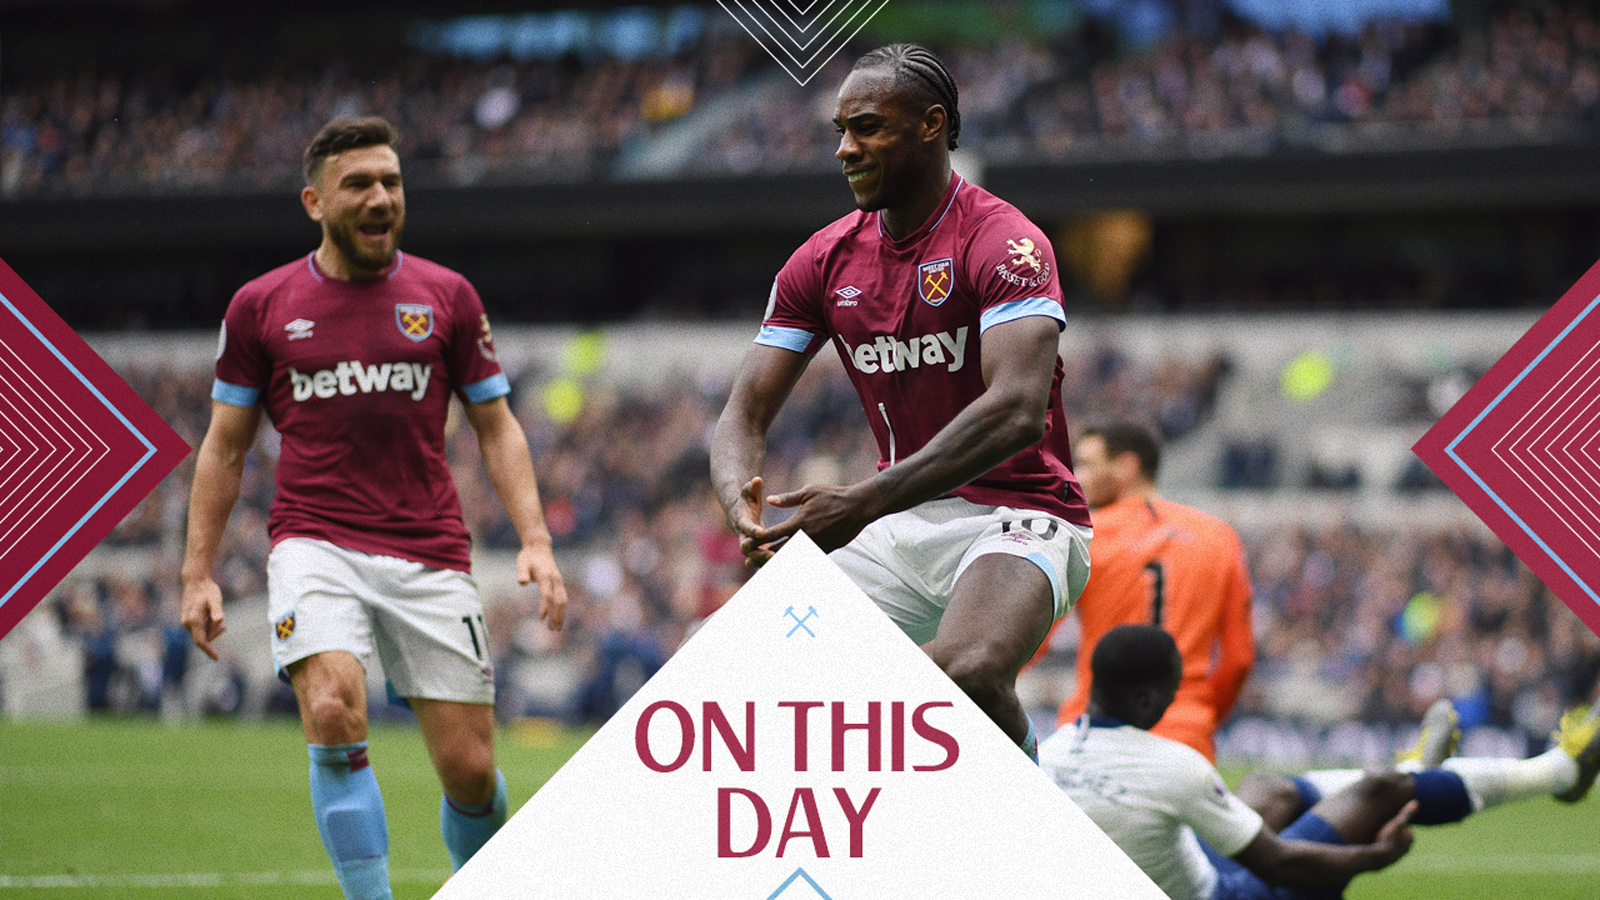 ON THIS DAY: ANTONIO FIRES HAMMERS TO FAMOUS FIRST WIN AT TOTTENHAM HOTSPUR STADIUM